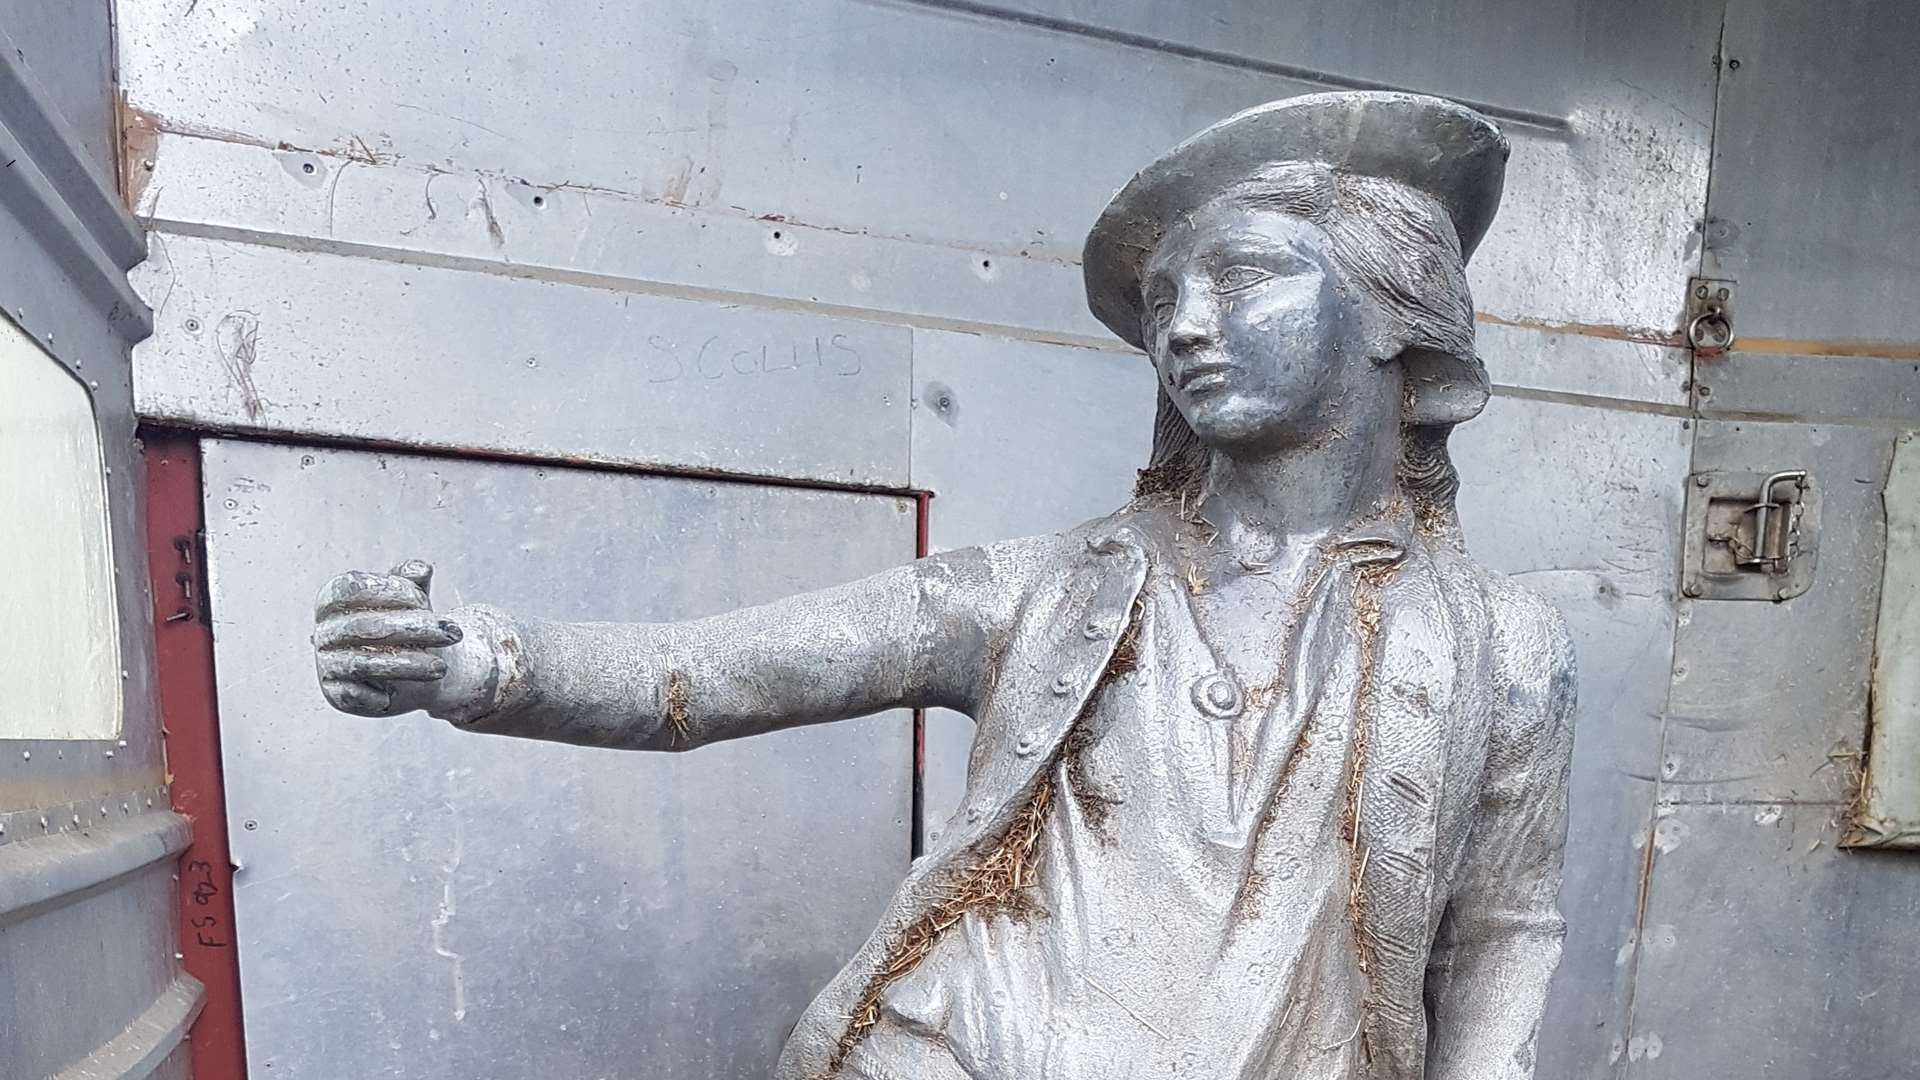 The statue was found in a horsebox. Picture: Kent Police